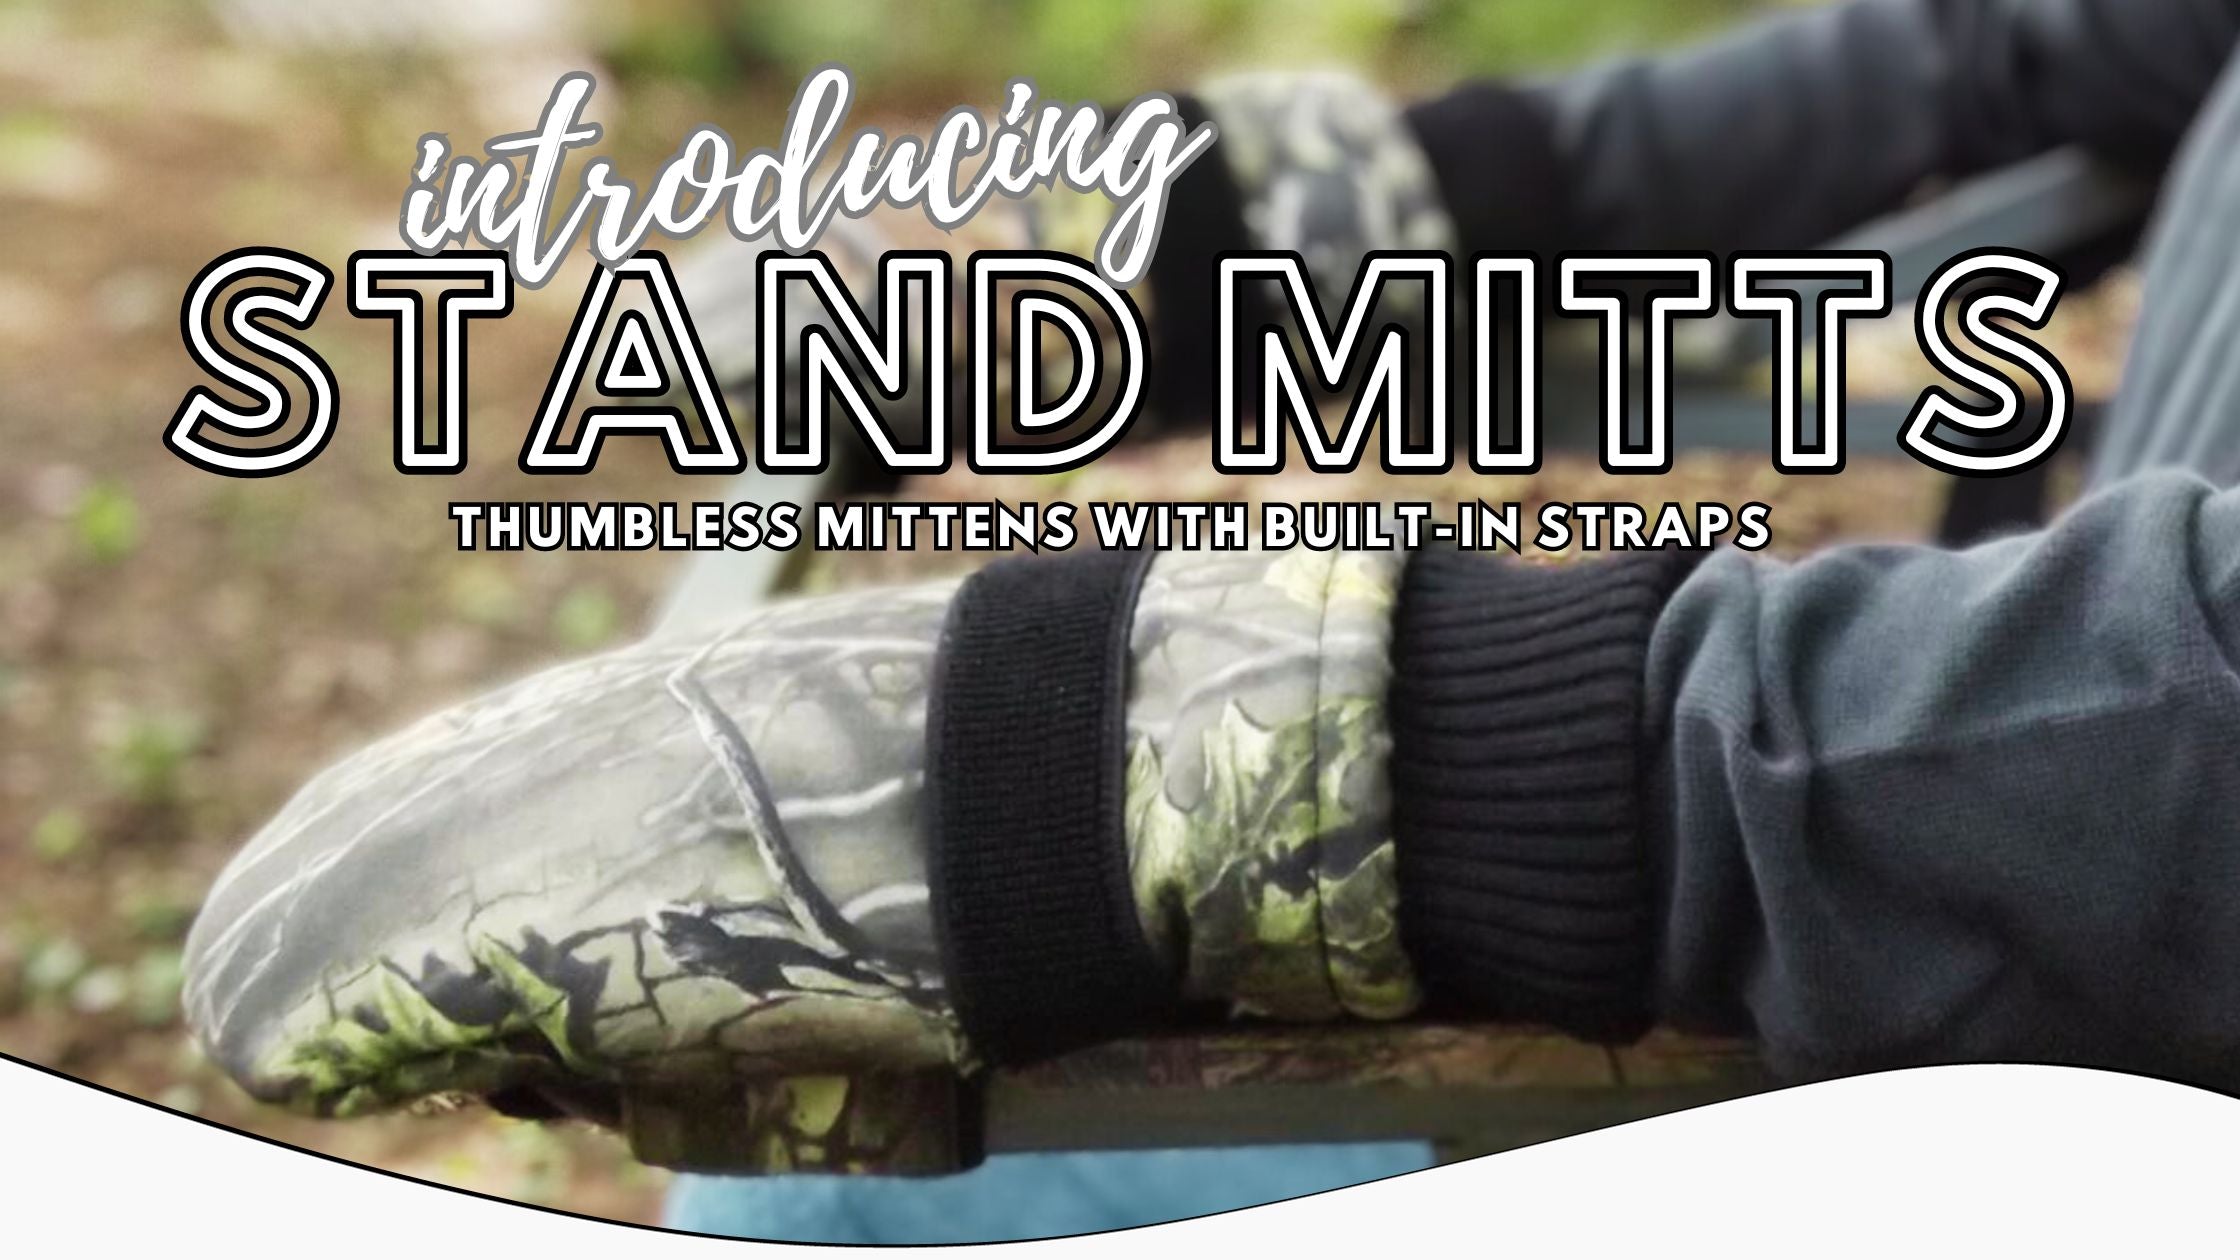 Introducing our newest product! Stand Mitts by Chill-N-Reel strap